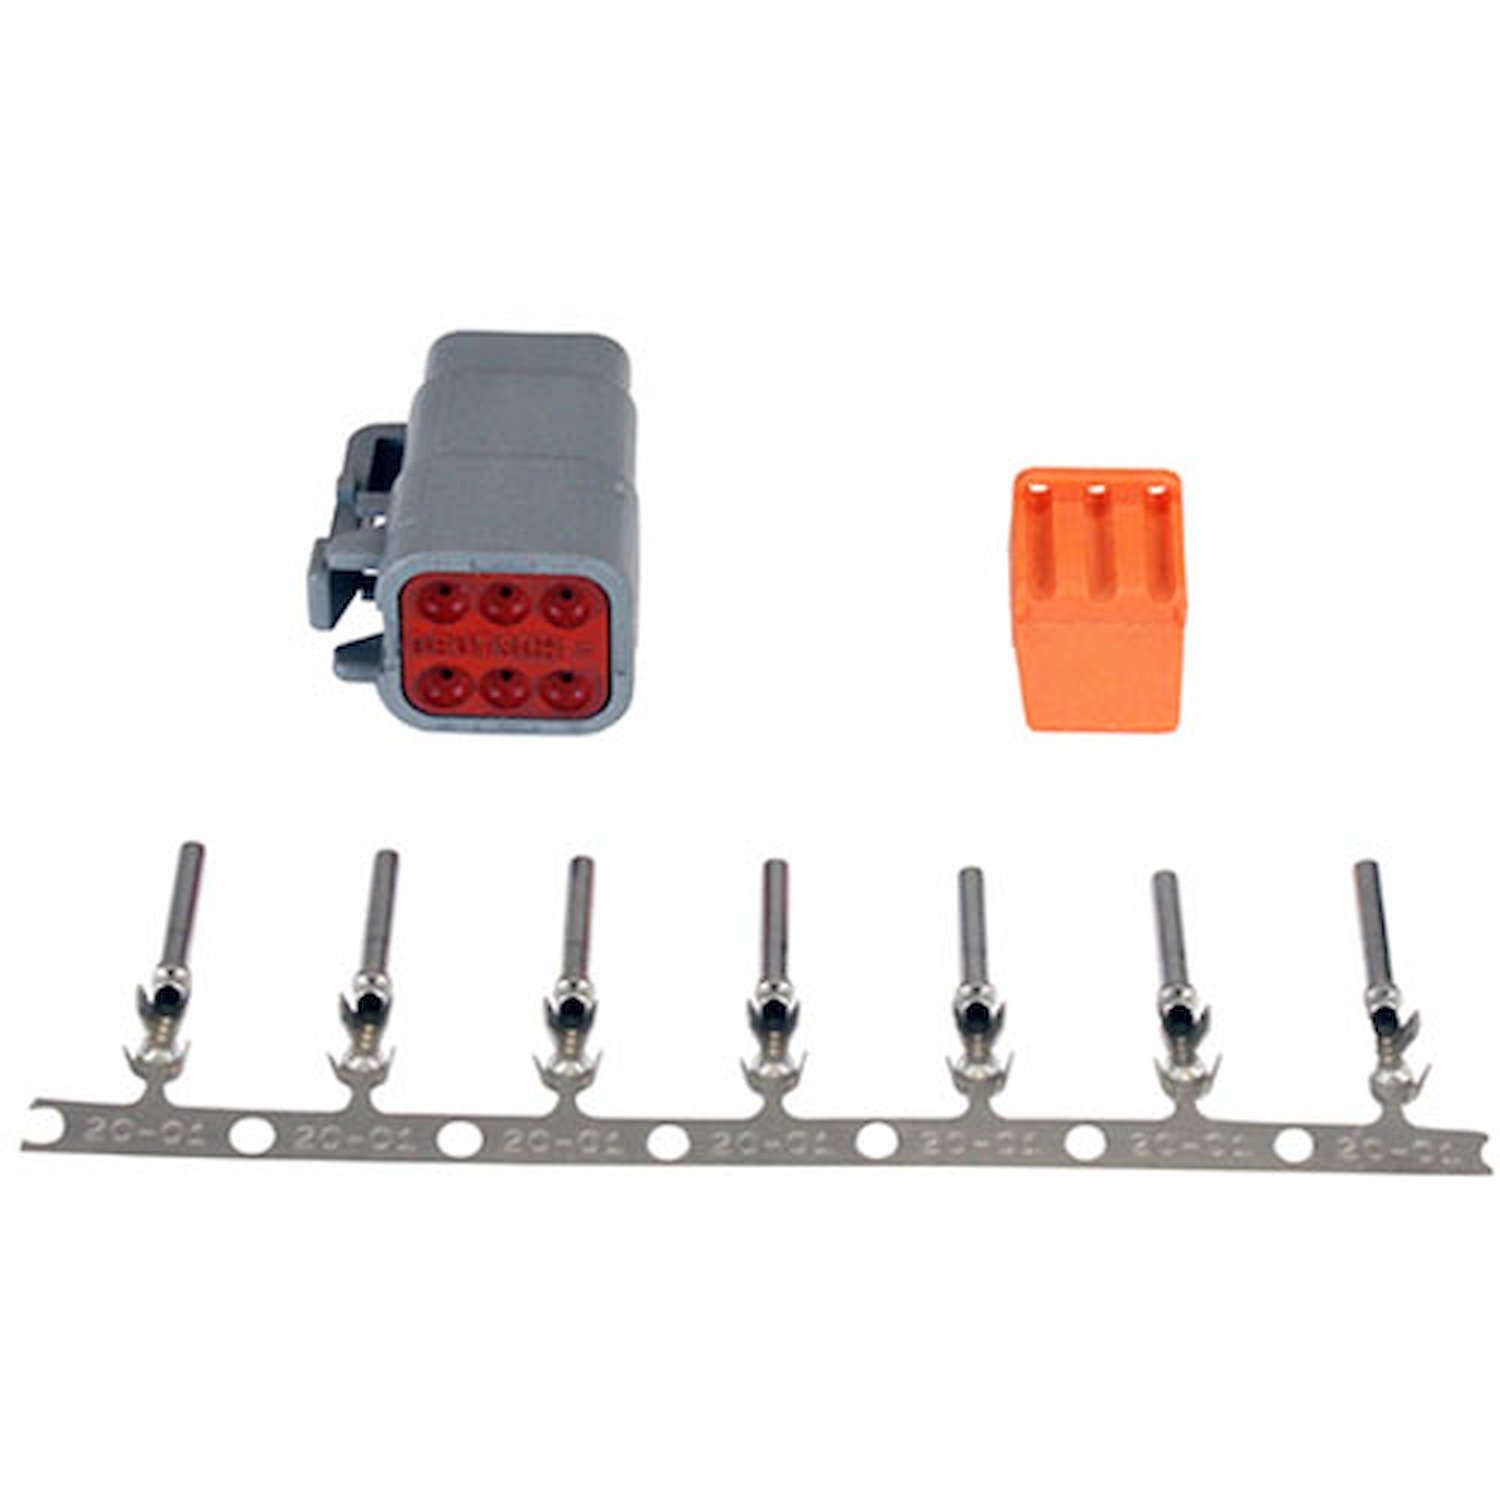 DTM-Style 6-Way Plug Connector Kit Includes Plug, Plug Wedge Lock And 7 Female Pins